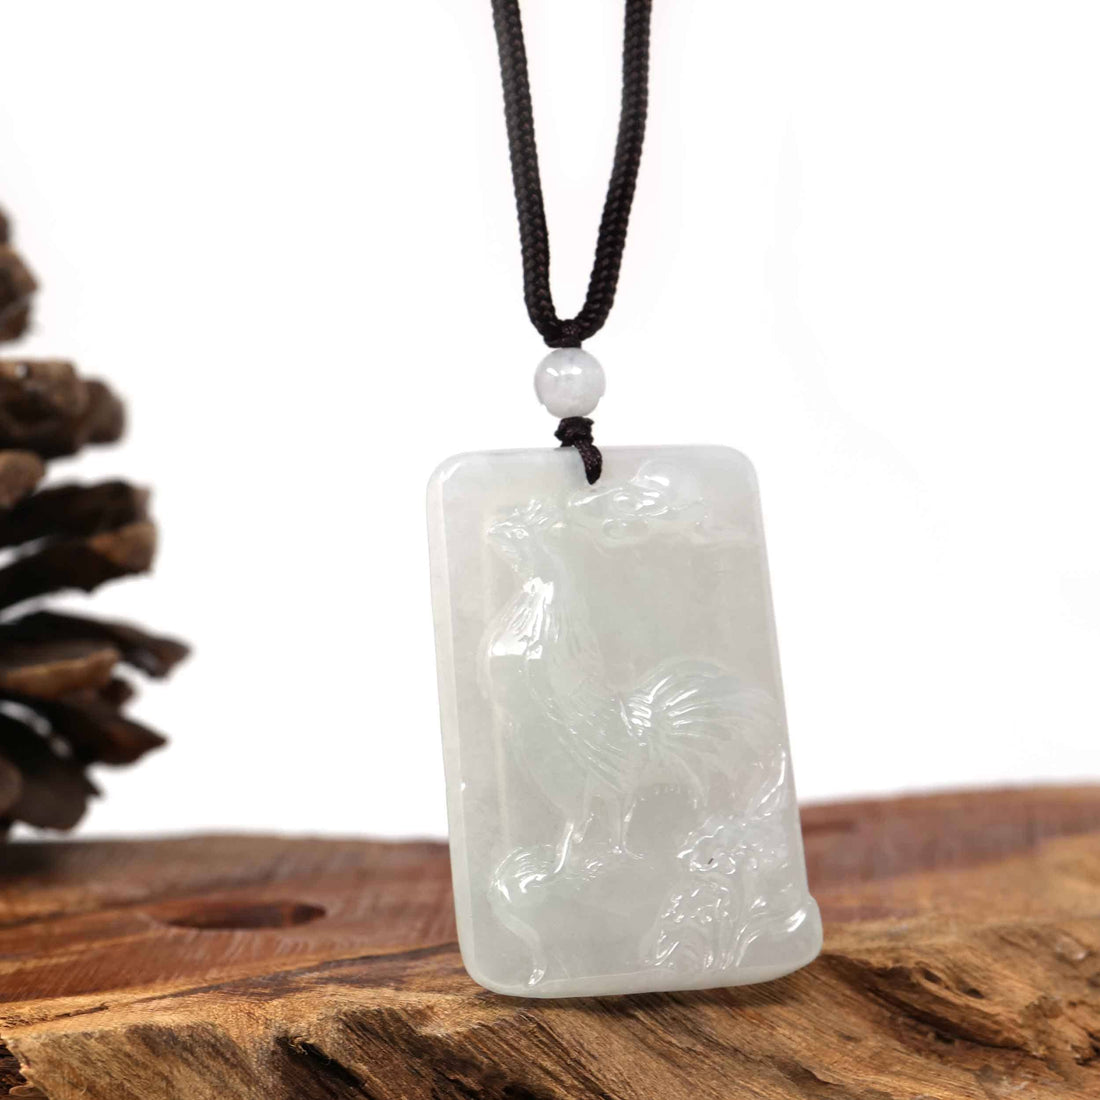 Baikalla Jewelry Jade Carving Necklace Copy of Natural Honey Yellow Jadeite Jade "Rooster" Pendant Necklace For Men, Collectibles.